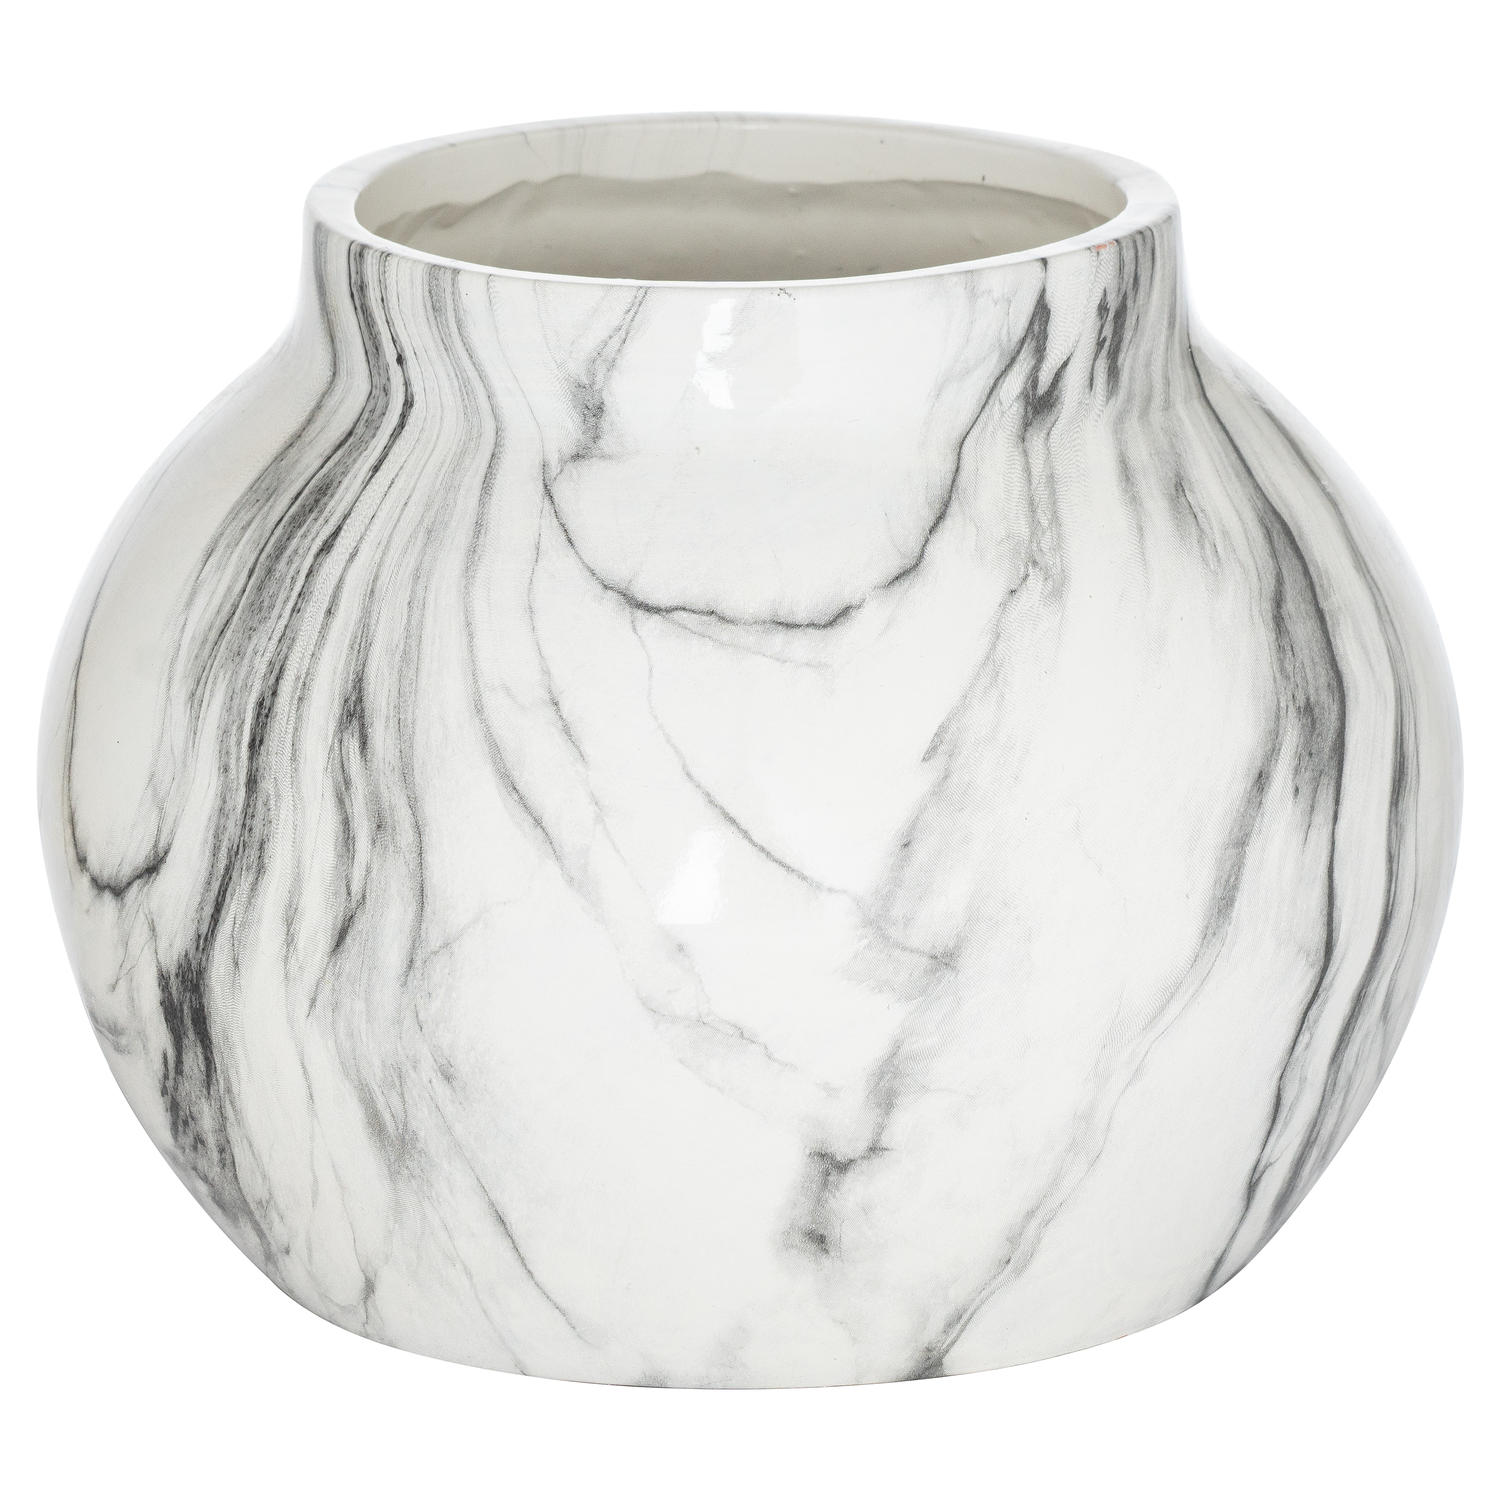 Marble Planter - Image 1